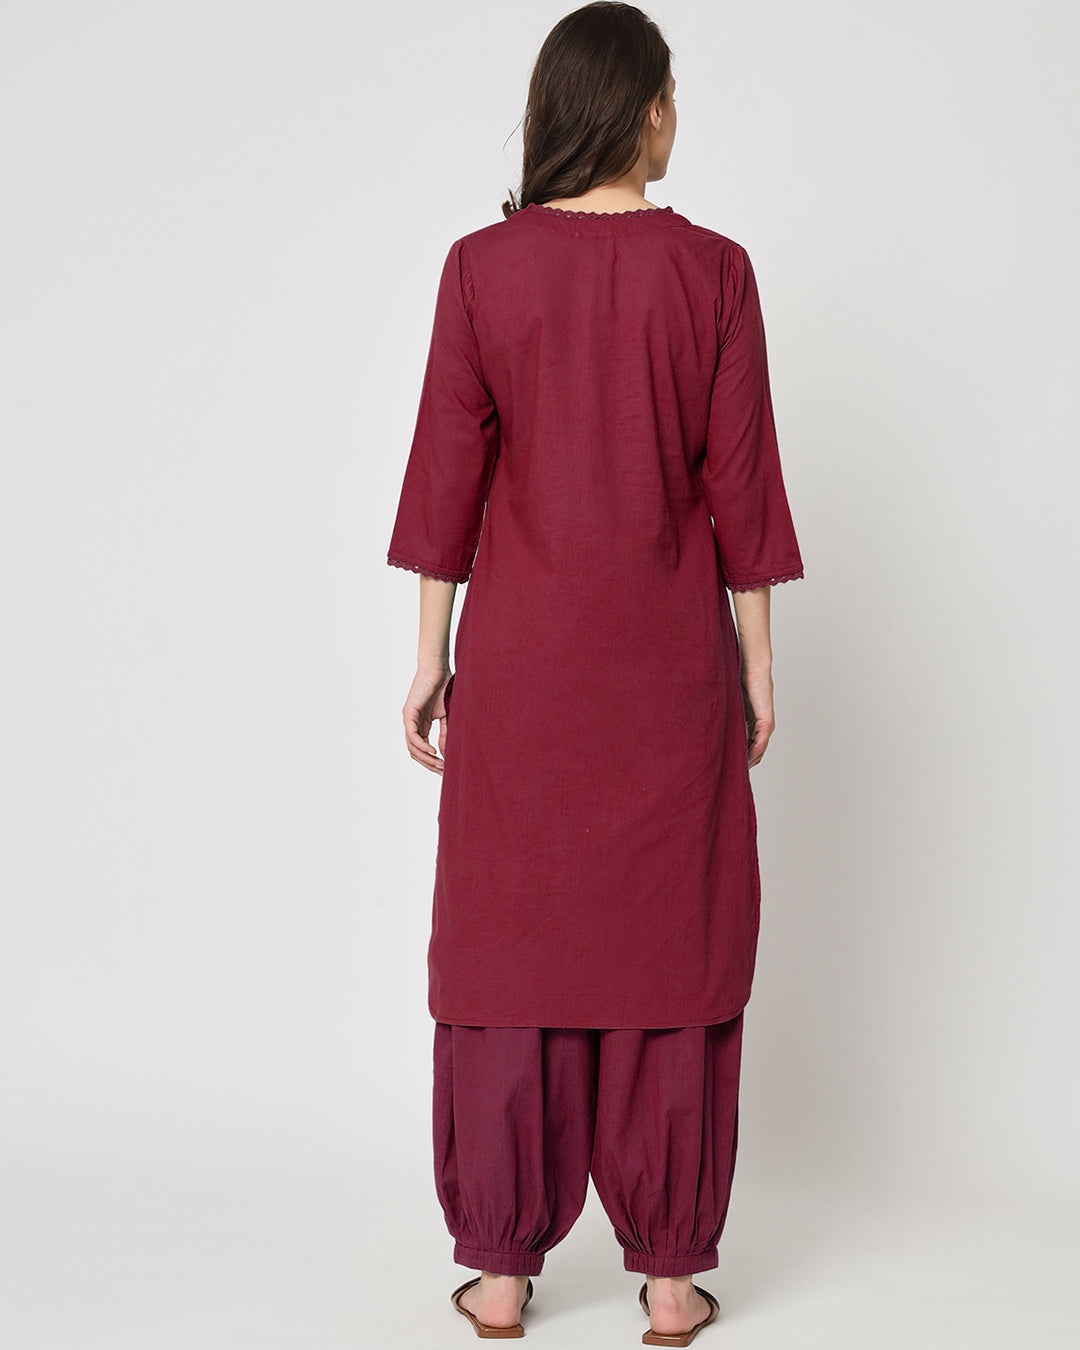 Russet Red Lace Affair Solid Kurta (Without Bottoms)